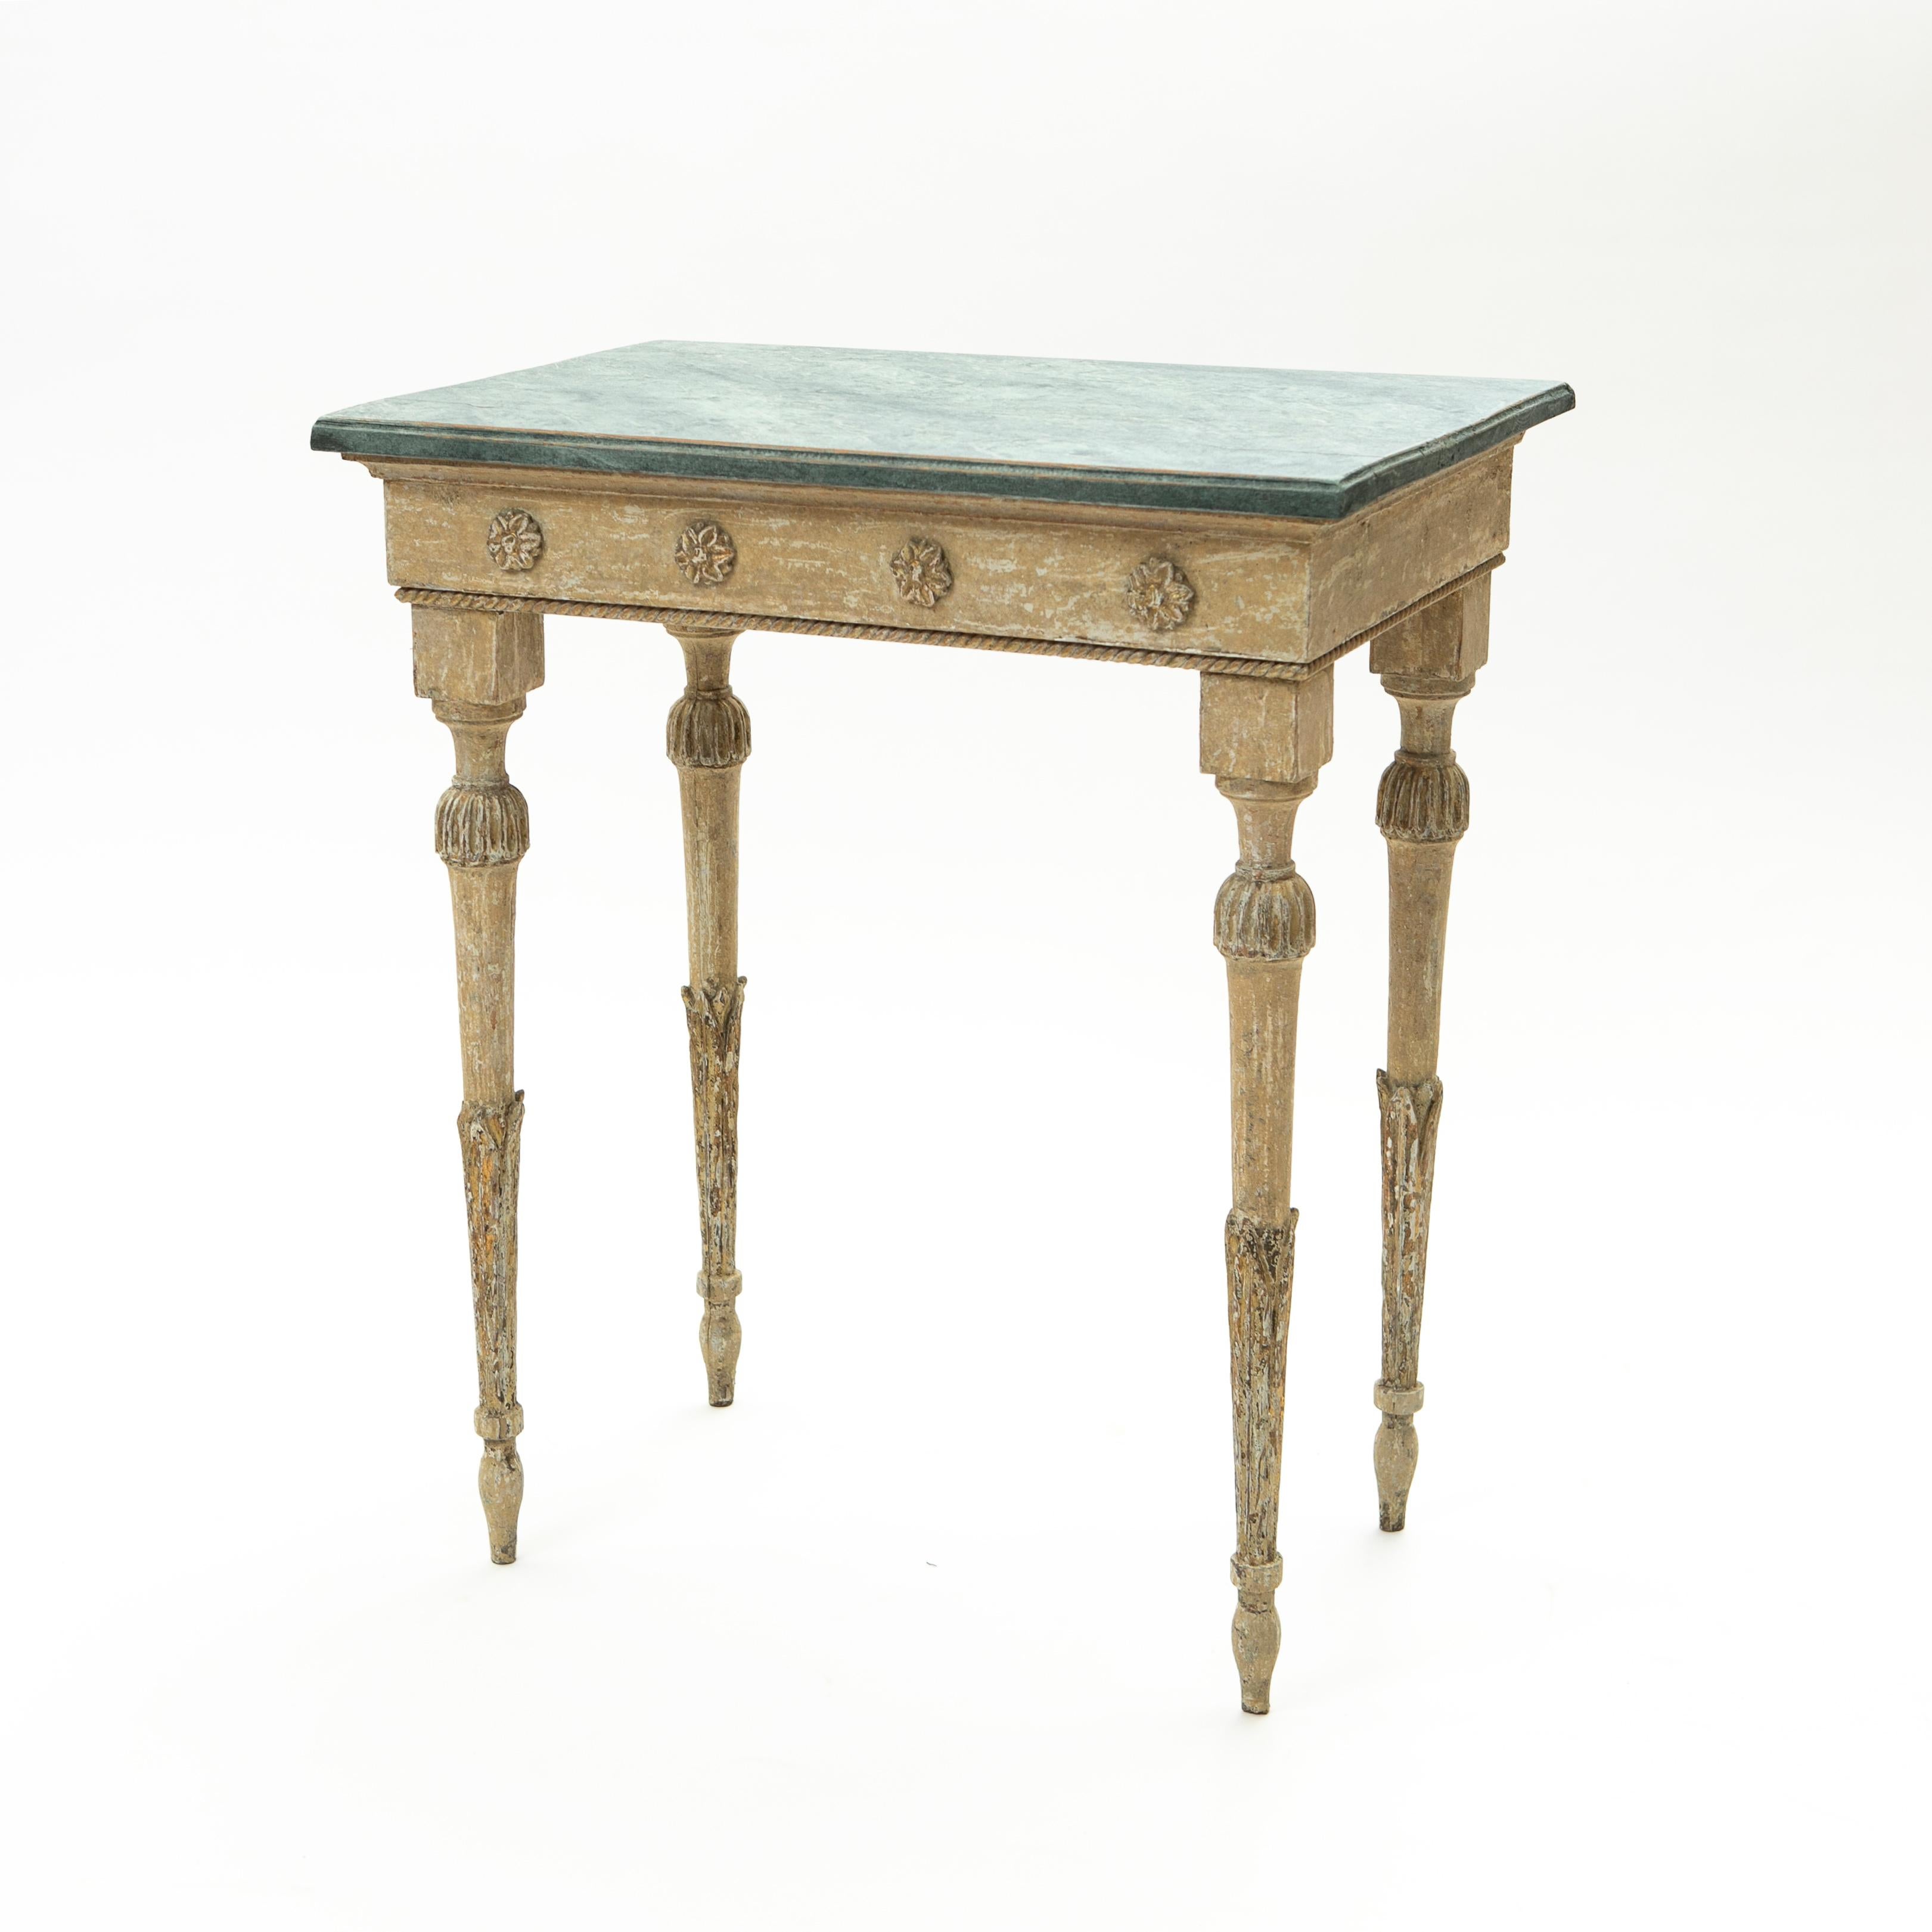 Hand-Painted Antique Gustavian Console Table